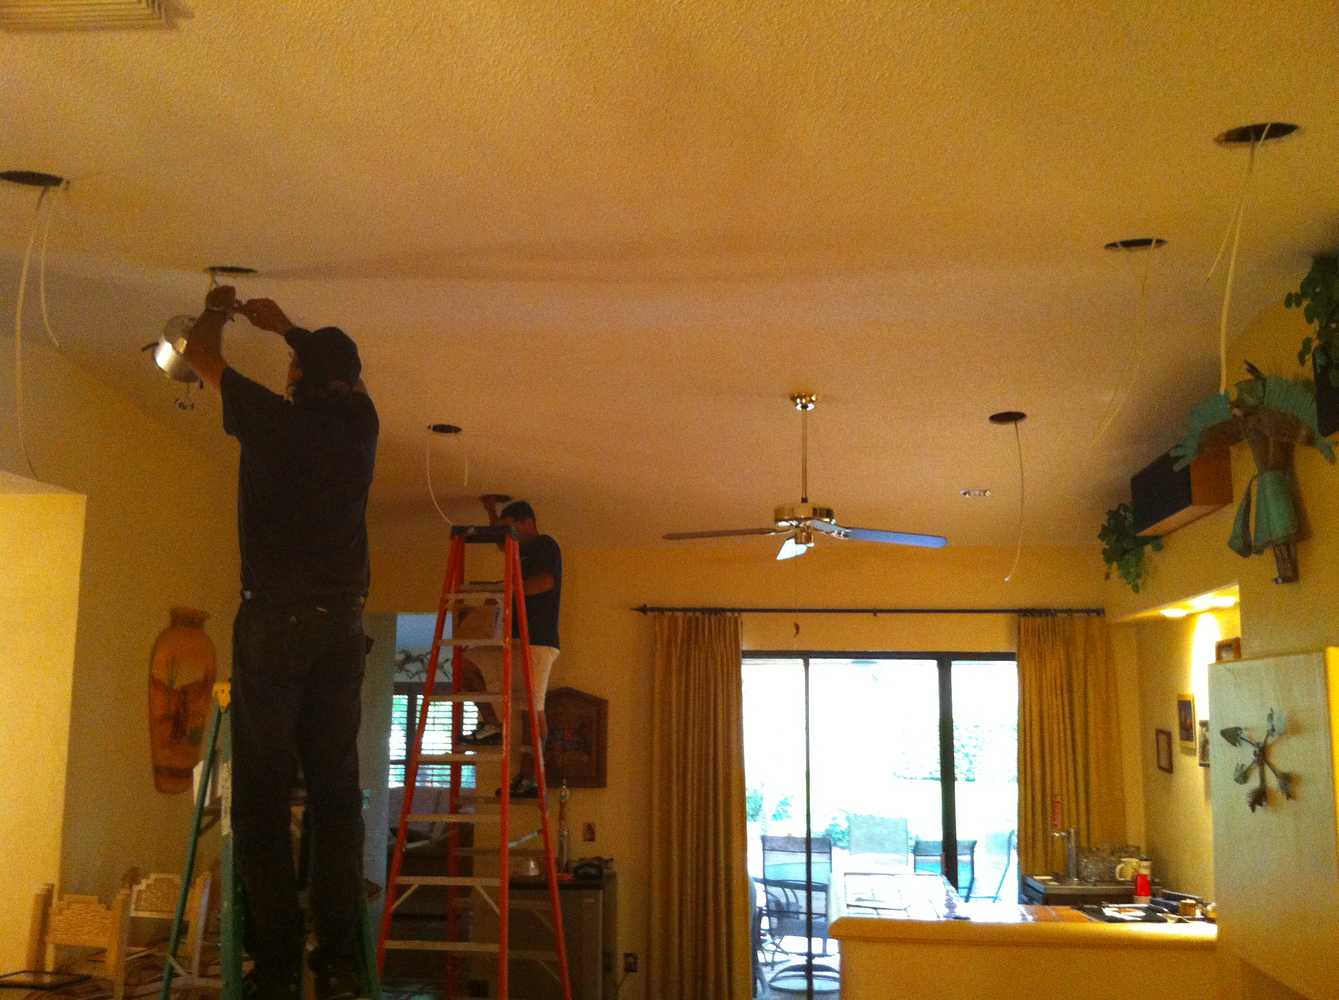 Electrical and drywall division